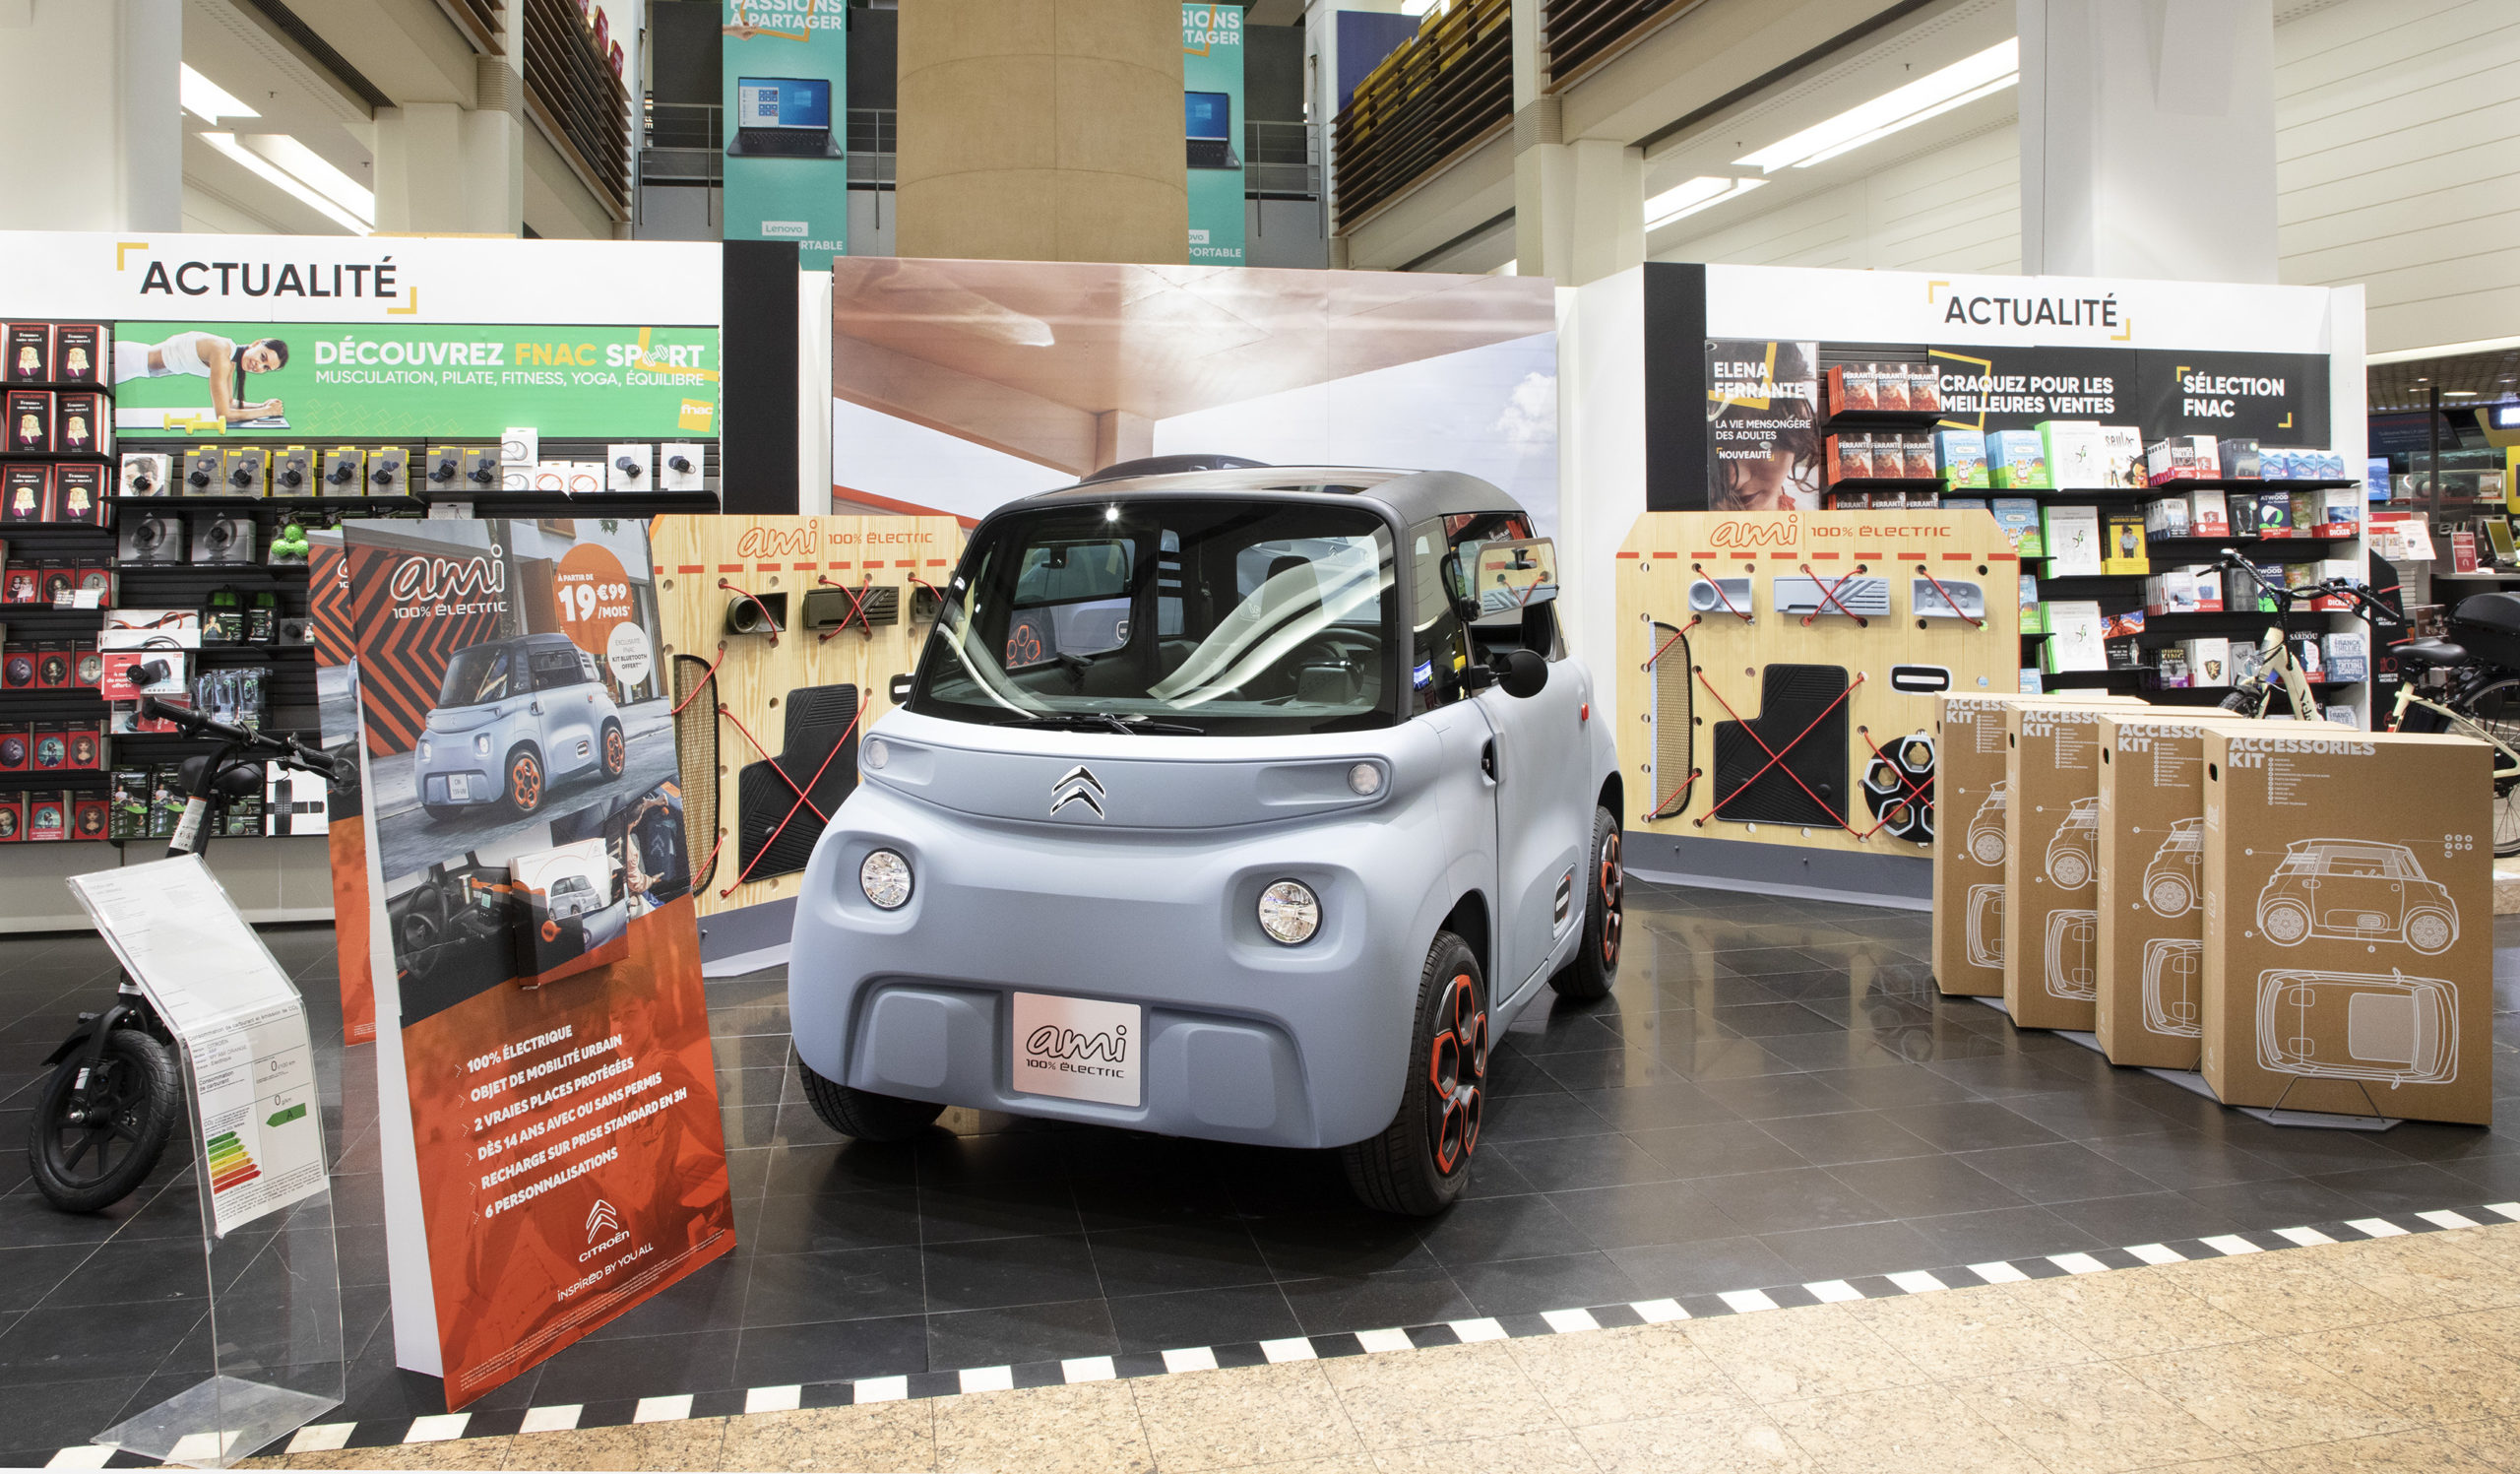 Citroën Ami to be sold in Fnac Darty shops